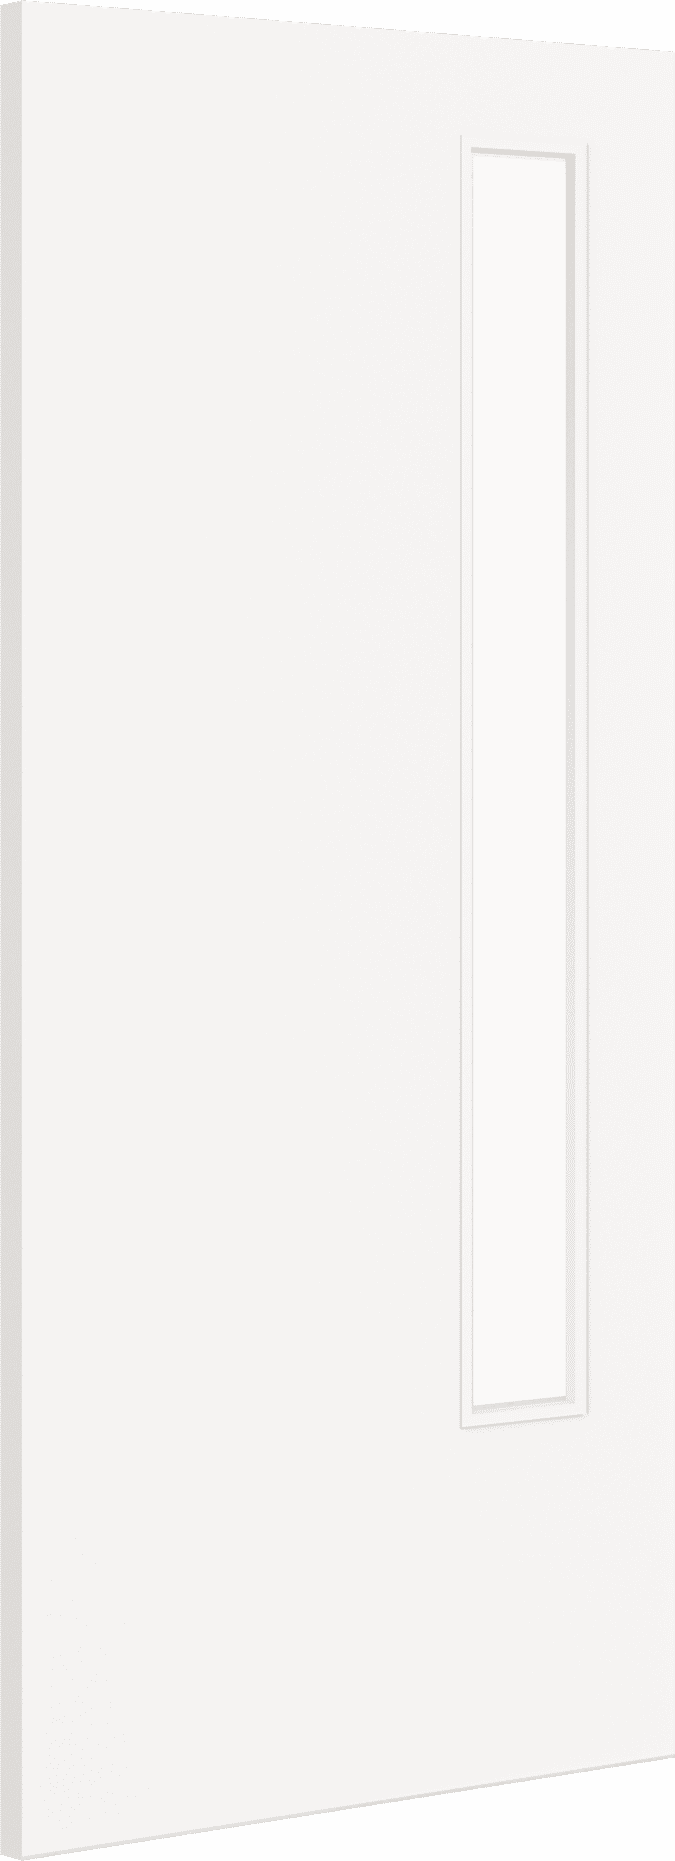 2040mm x 726mm x 44mm Architectural Paint Grade White 13 Frosted Glazed Fire Door Blank